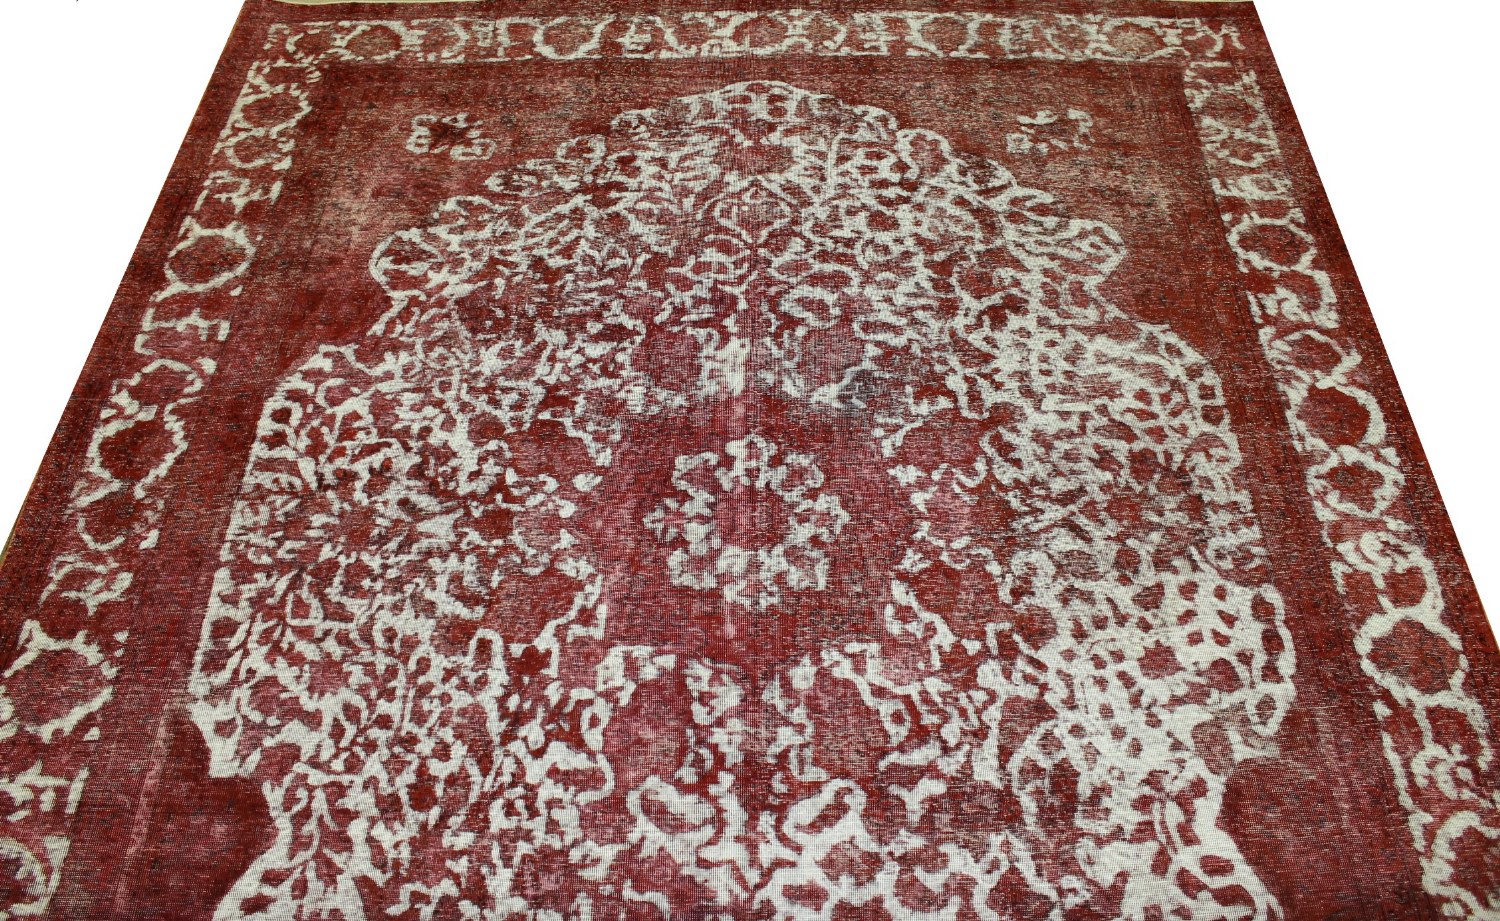 10x14 Vintage Hand Knotted Wool Area Rug - MR19270